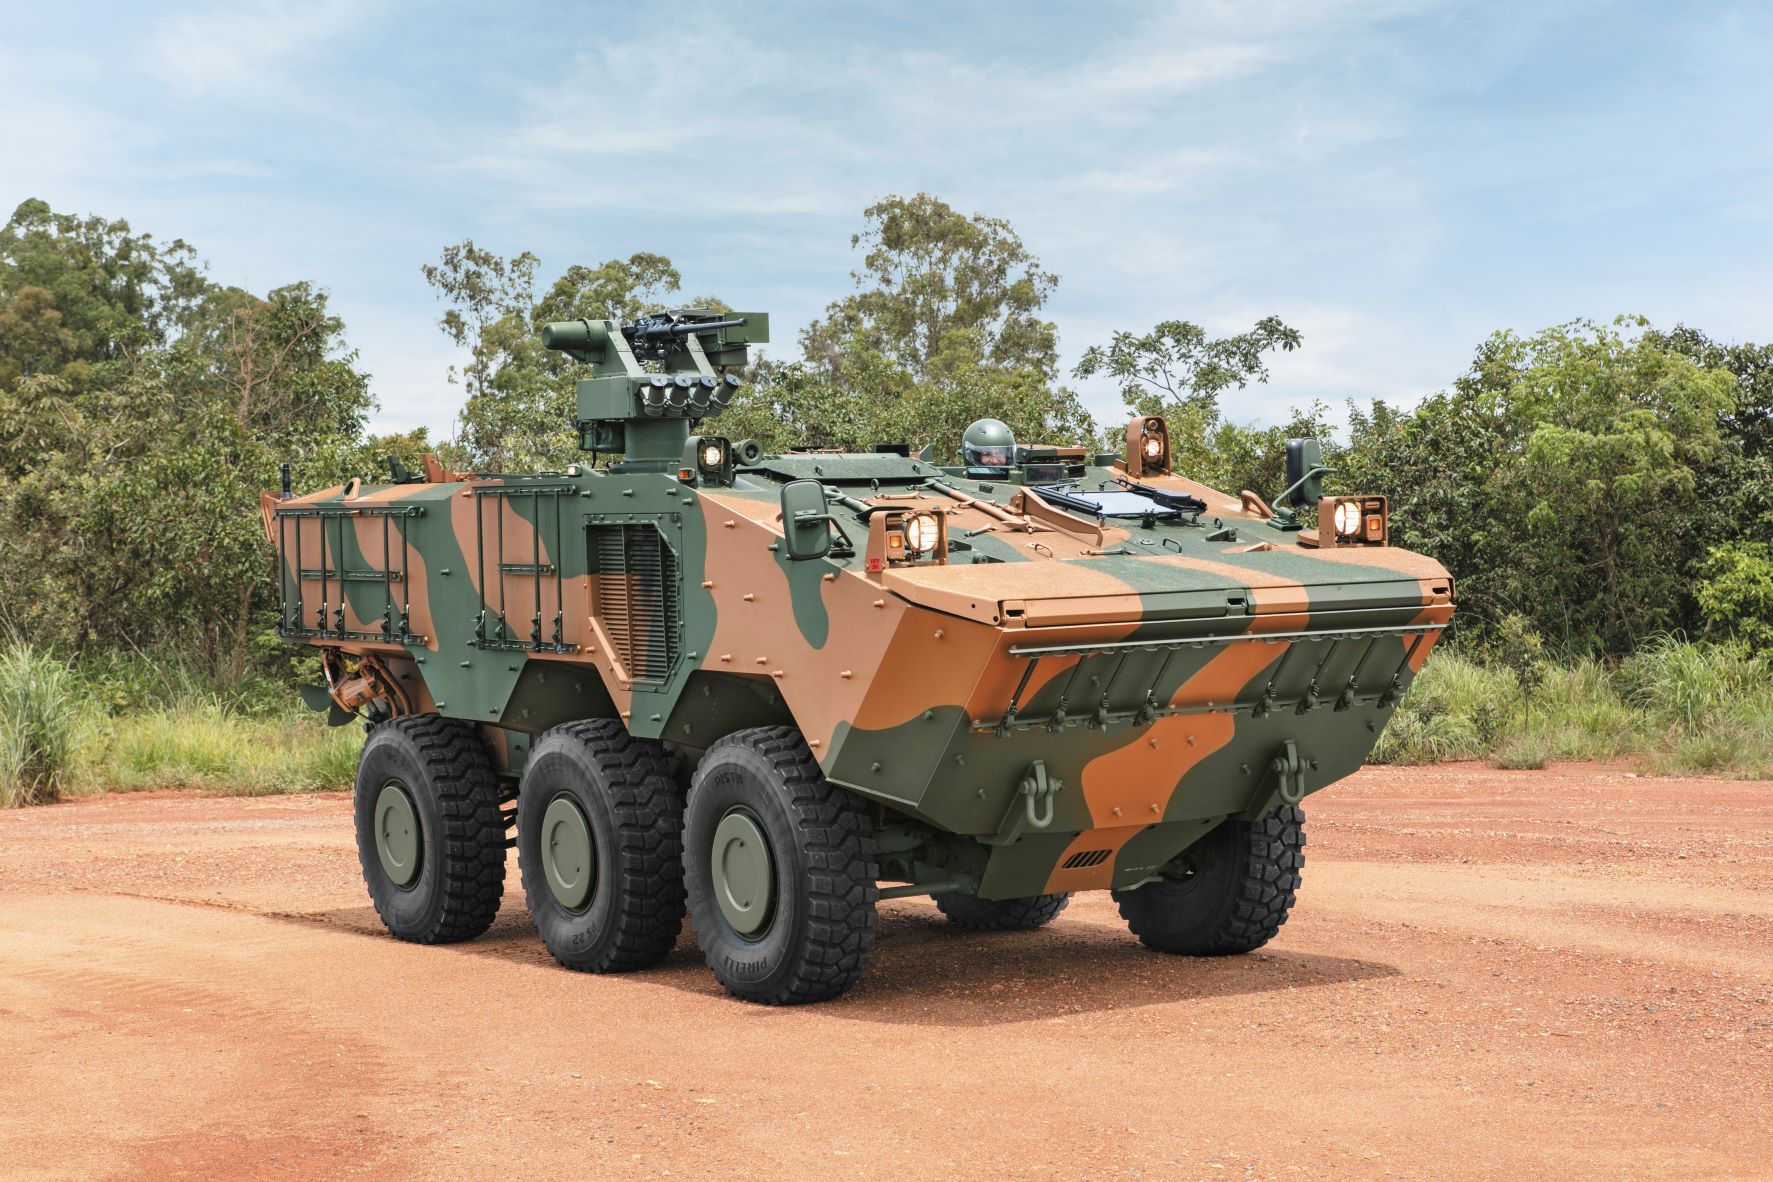 A Guarani 6x6 Armored Personnel Carrier is seen parked in an area with red sand and some trees and bushes in the background. The vehicle is painted in green and reddish-brown camouflage. A soldier wearing a helmet is seen peeking out the hatch. The far background is a blue sky with thin white clouds scattered evenly.